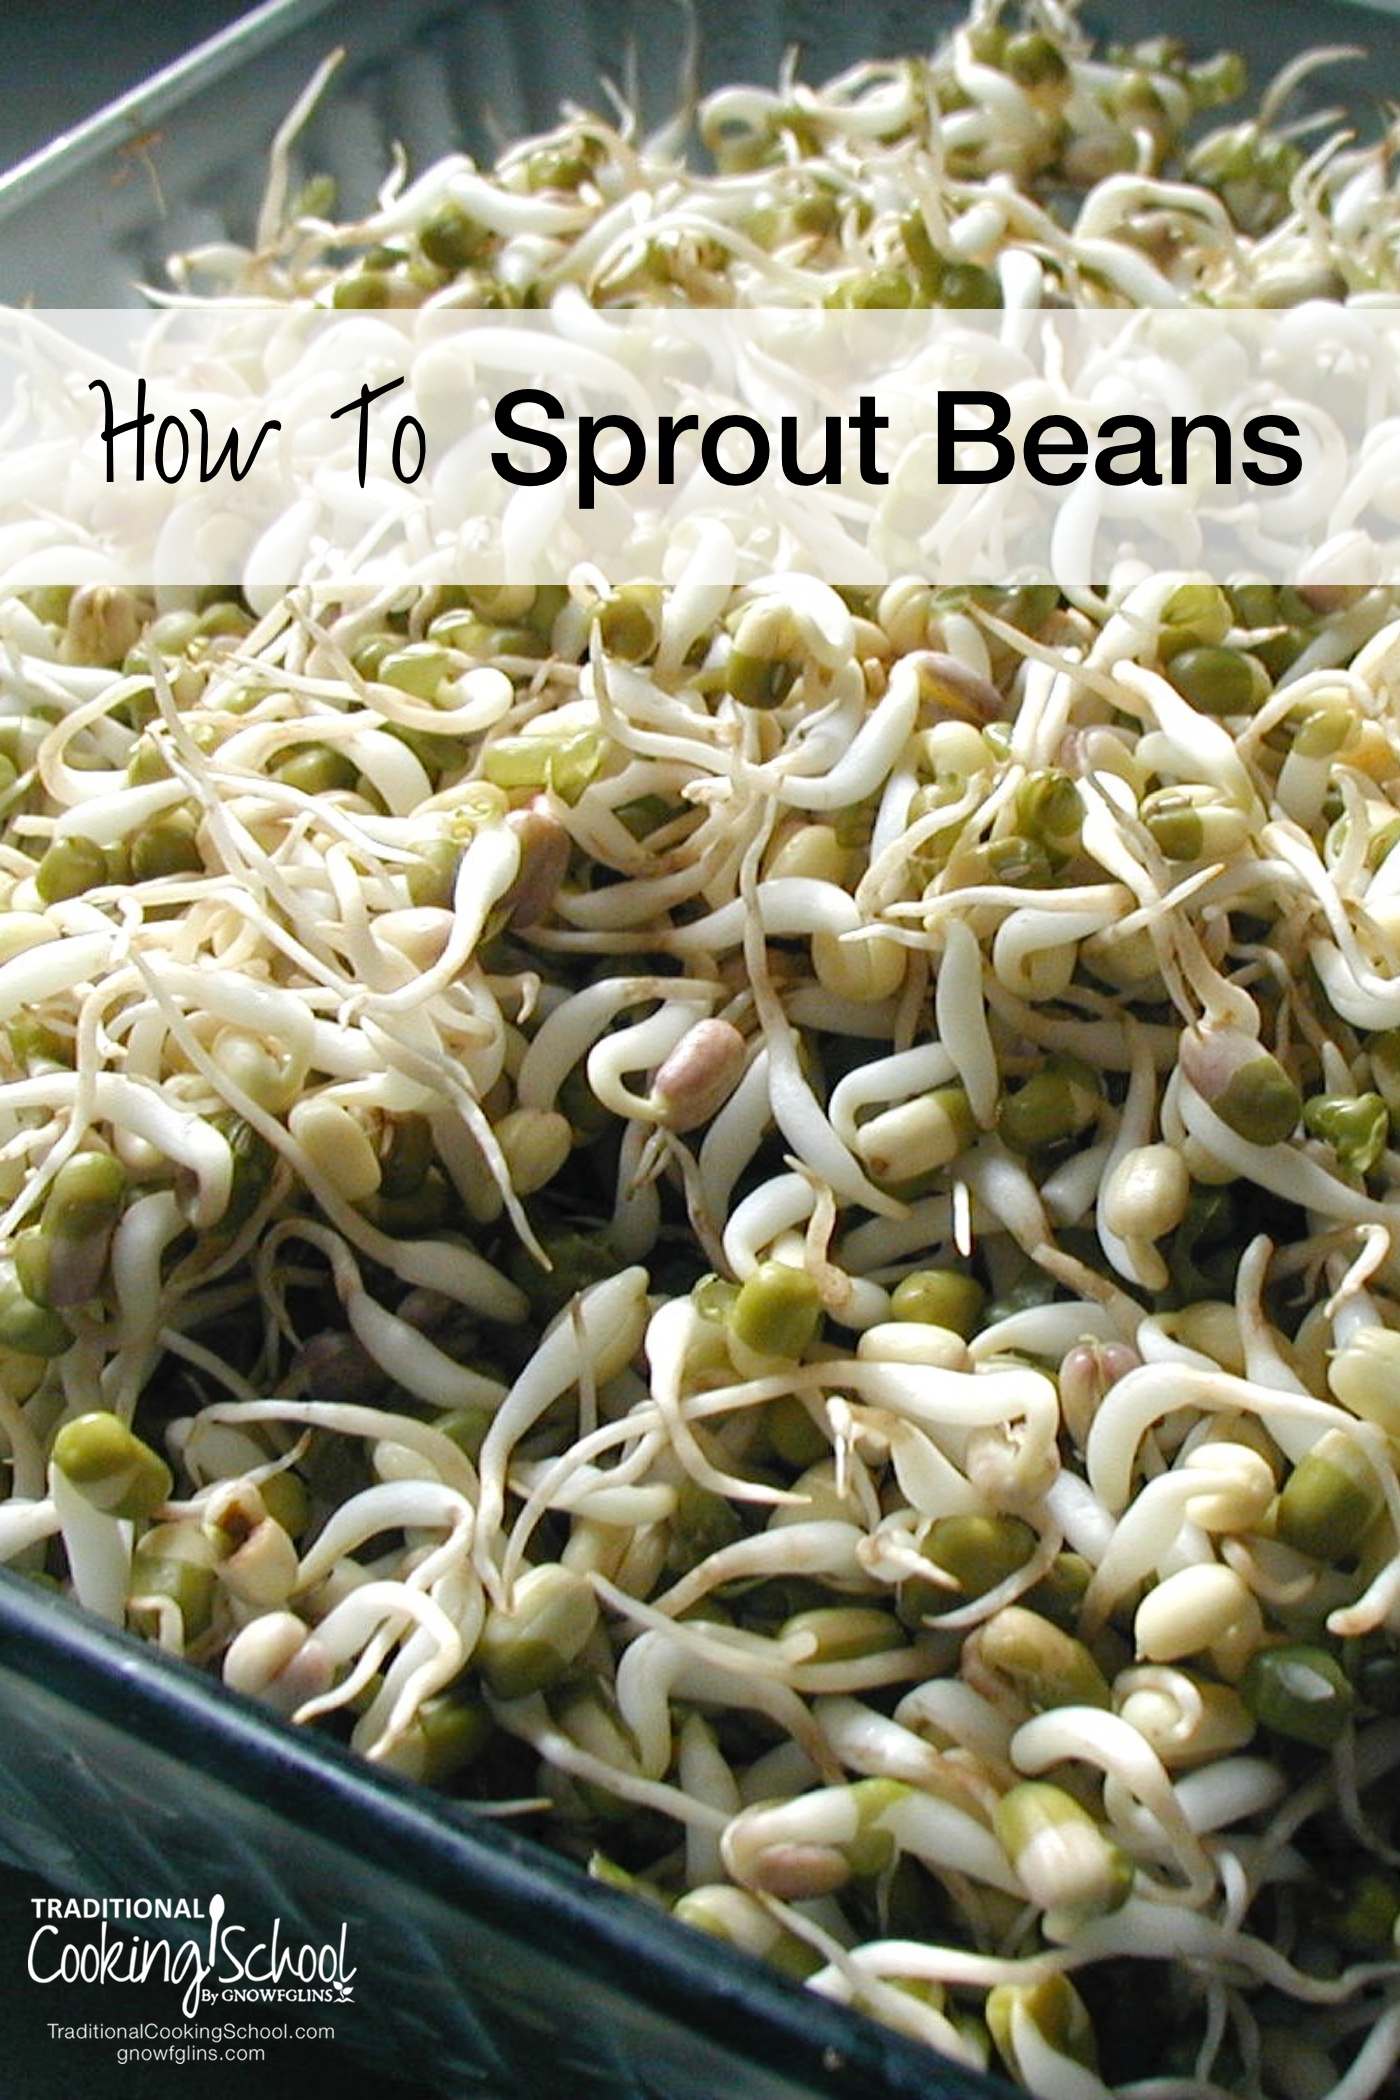 How To Sprout Beans | Beans are among the easiest of foods to sprout, and doing so helps to pre-digest them. Some (like lentils) can be eaten raw, though most people will digest beans best they're lightly steamed or cooked. Here are very easy directions for sprouting, and you'll find more inside our unlimited classes. | TraditionalCookingSchool.com